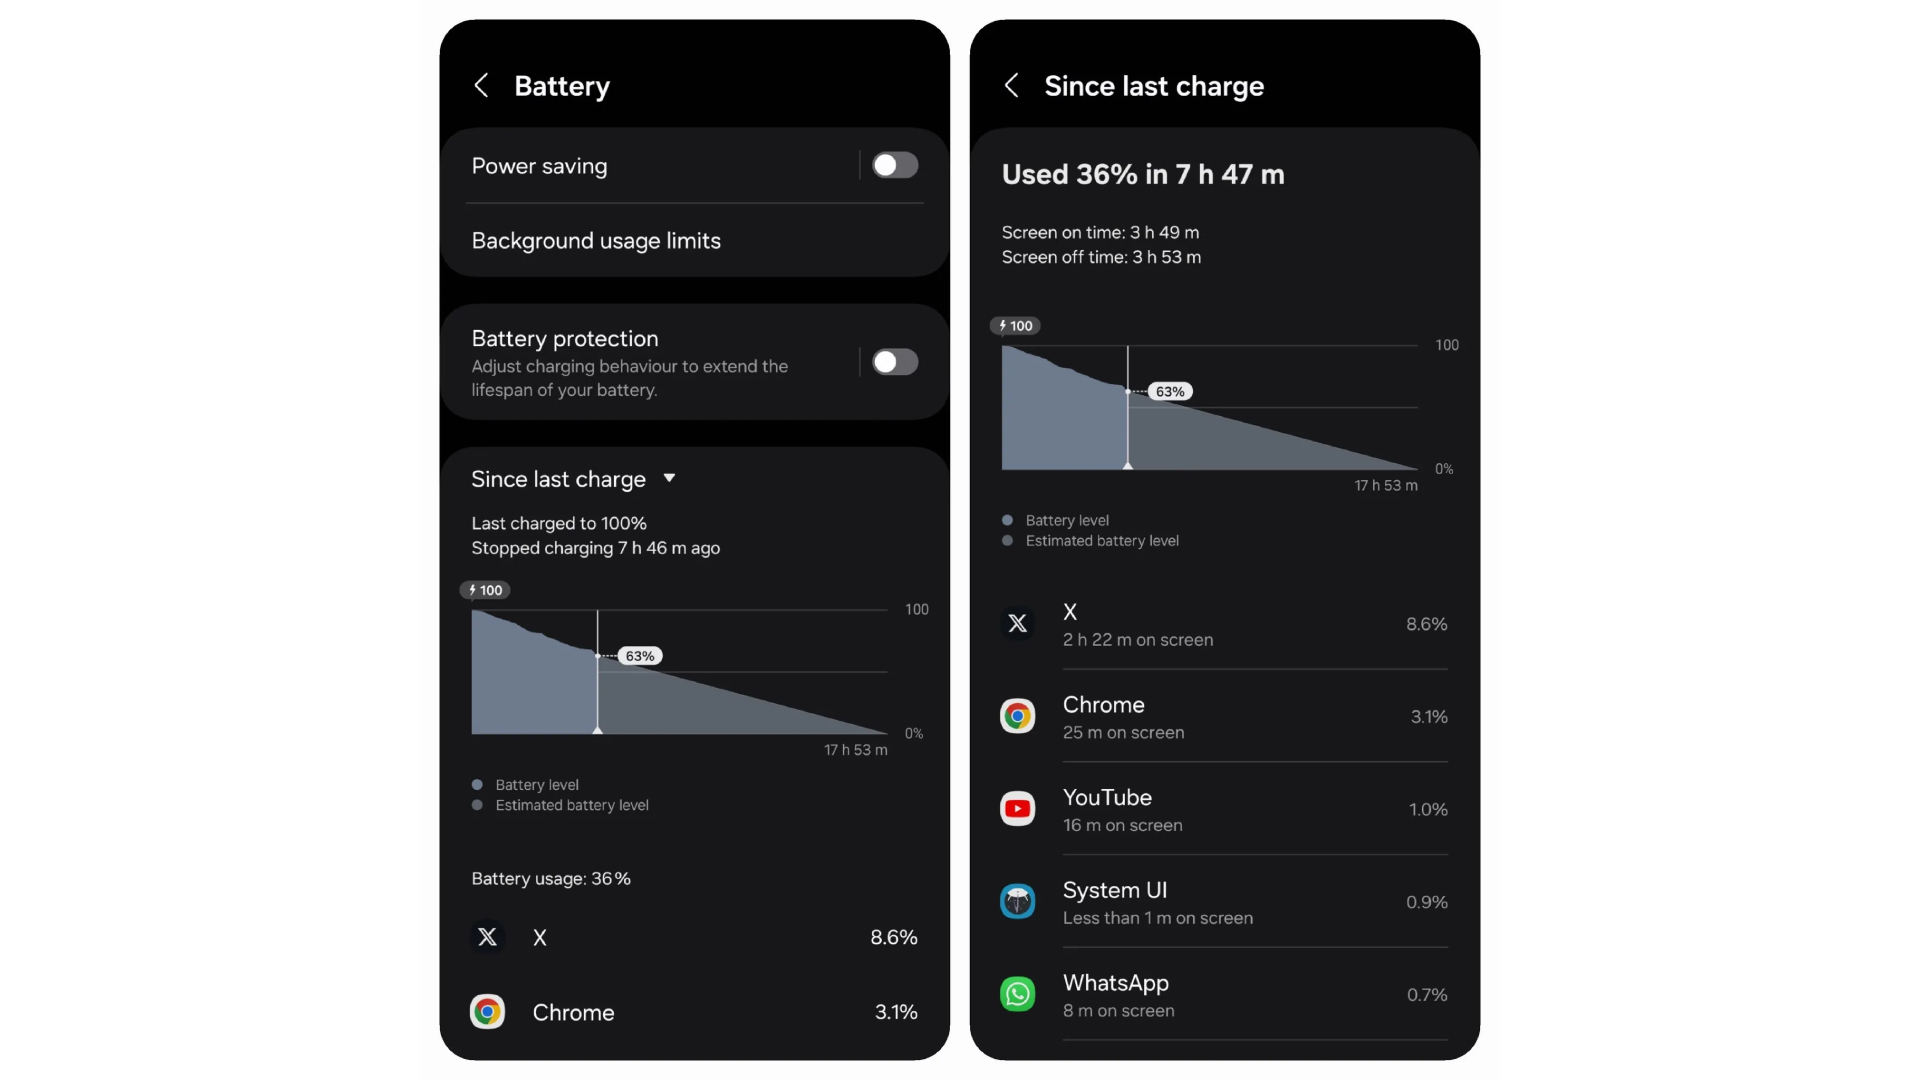 samsung brings back a battery feature it previously removed